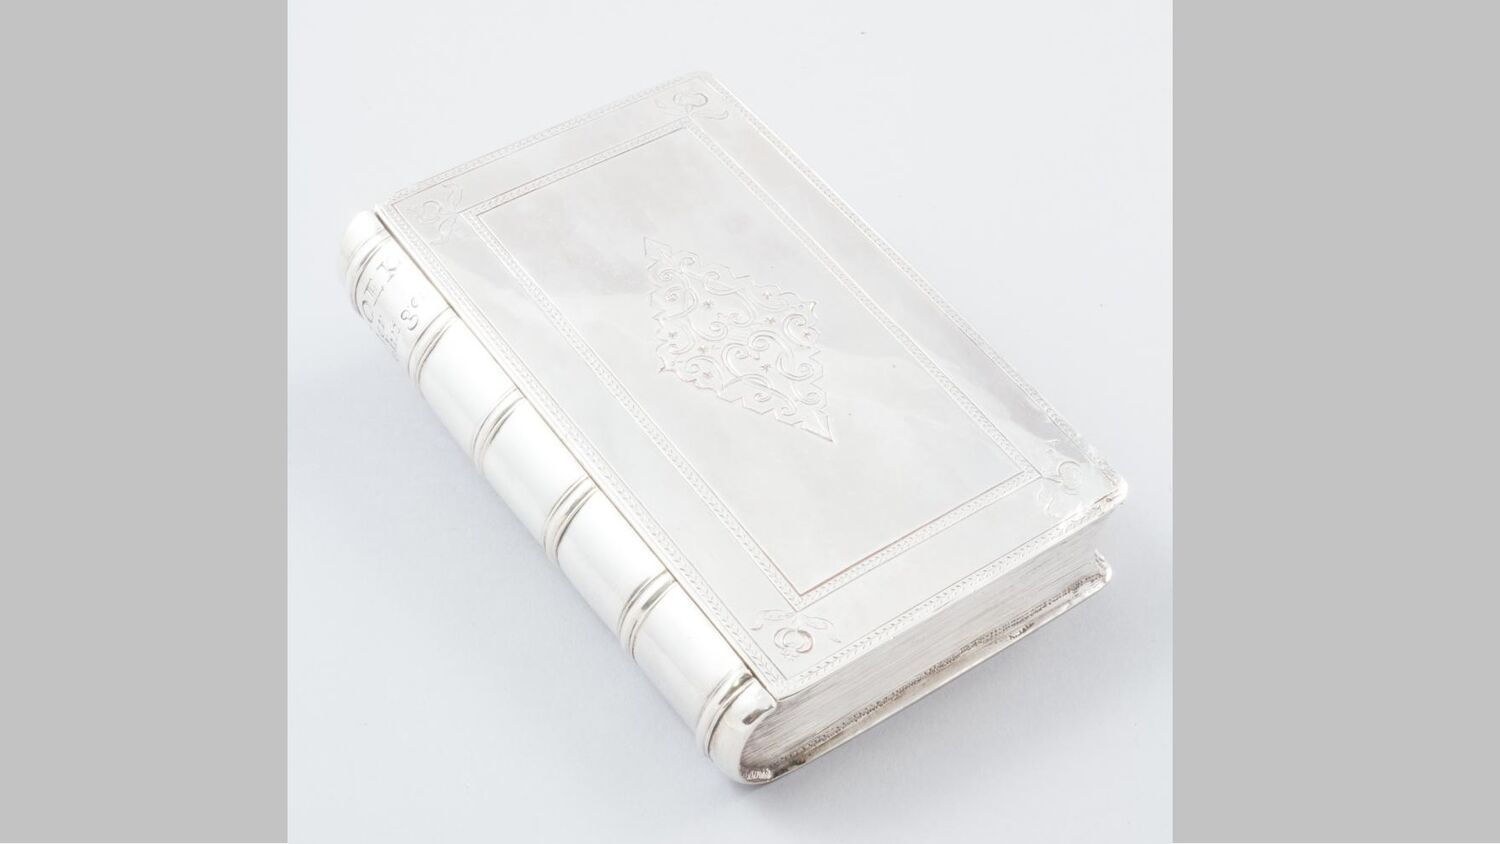 A little silver oblong box, shaped like an old book, is displayed against a pale grey background. It has some etched patterns on the top and side.